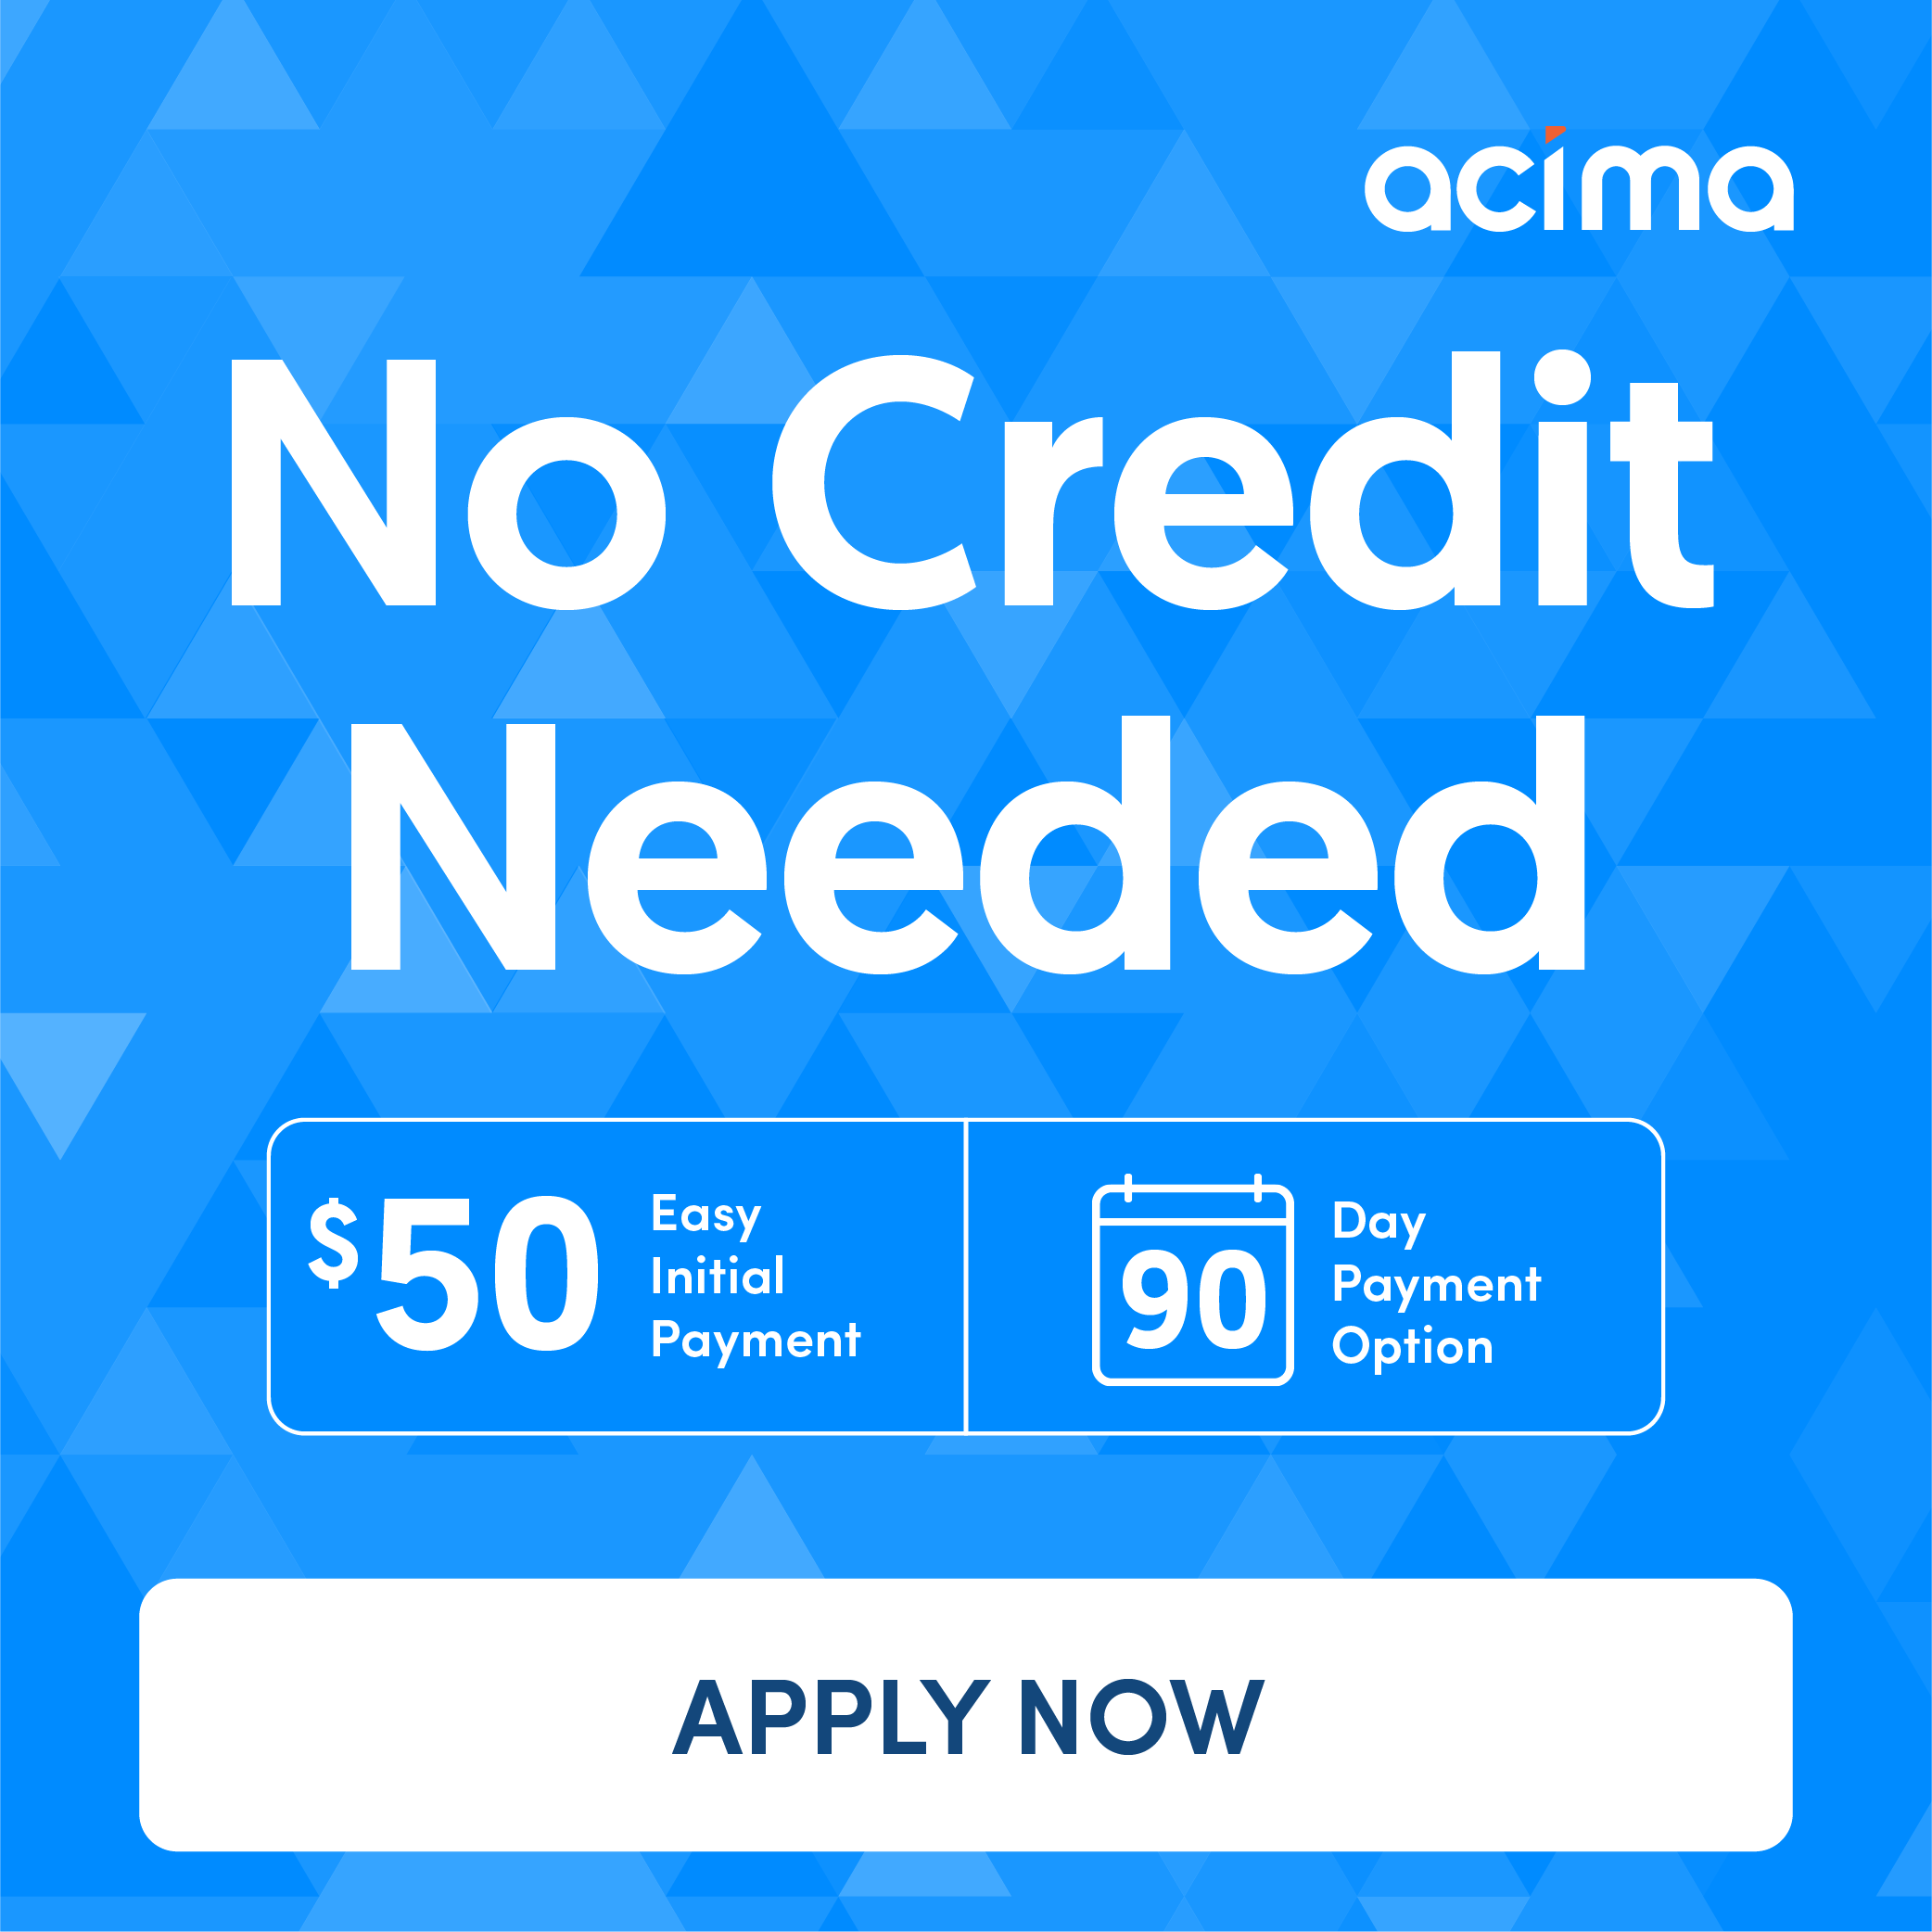 ACIMA - Contact Store to Apply